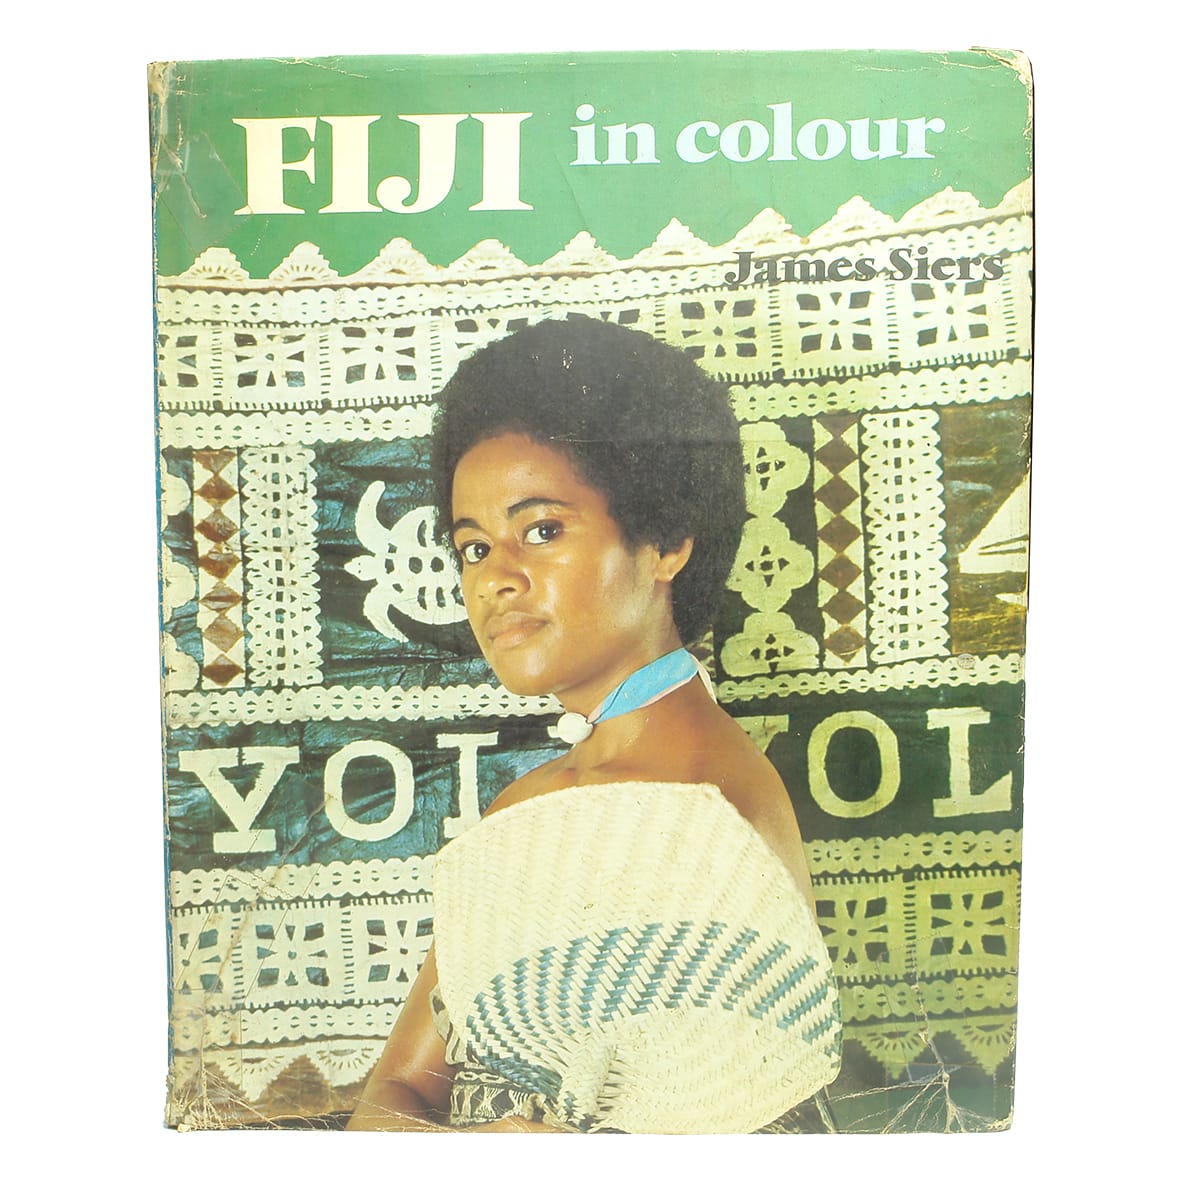 Book.  Fiji in colour, by James Siers.